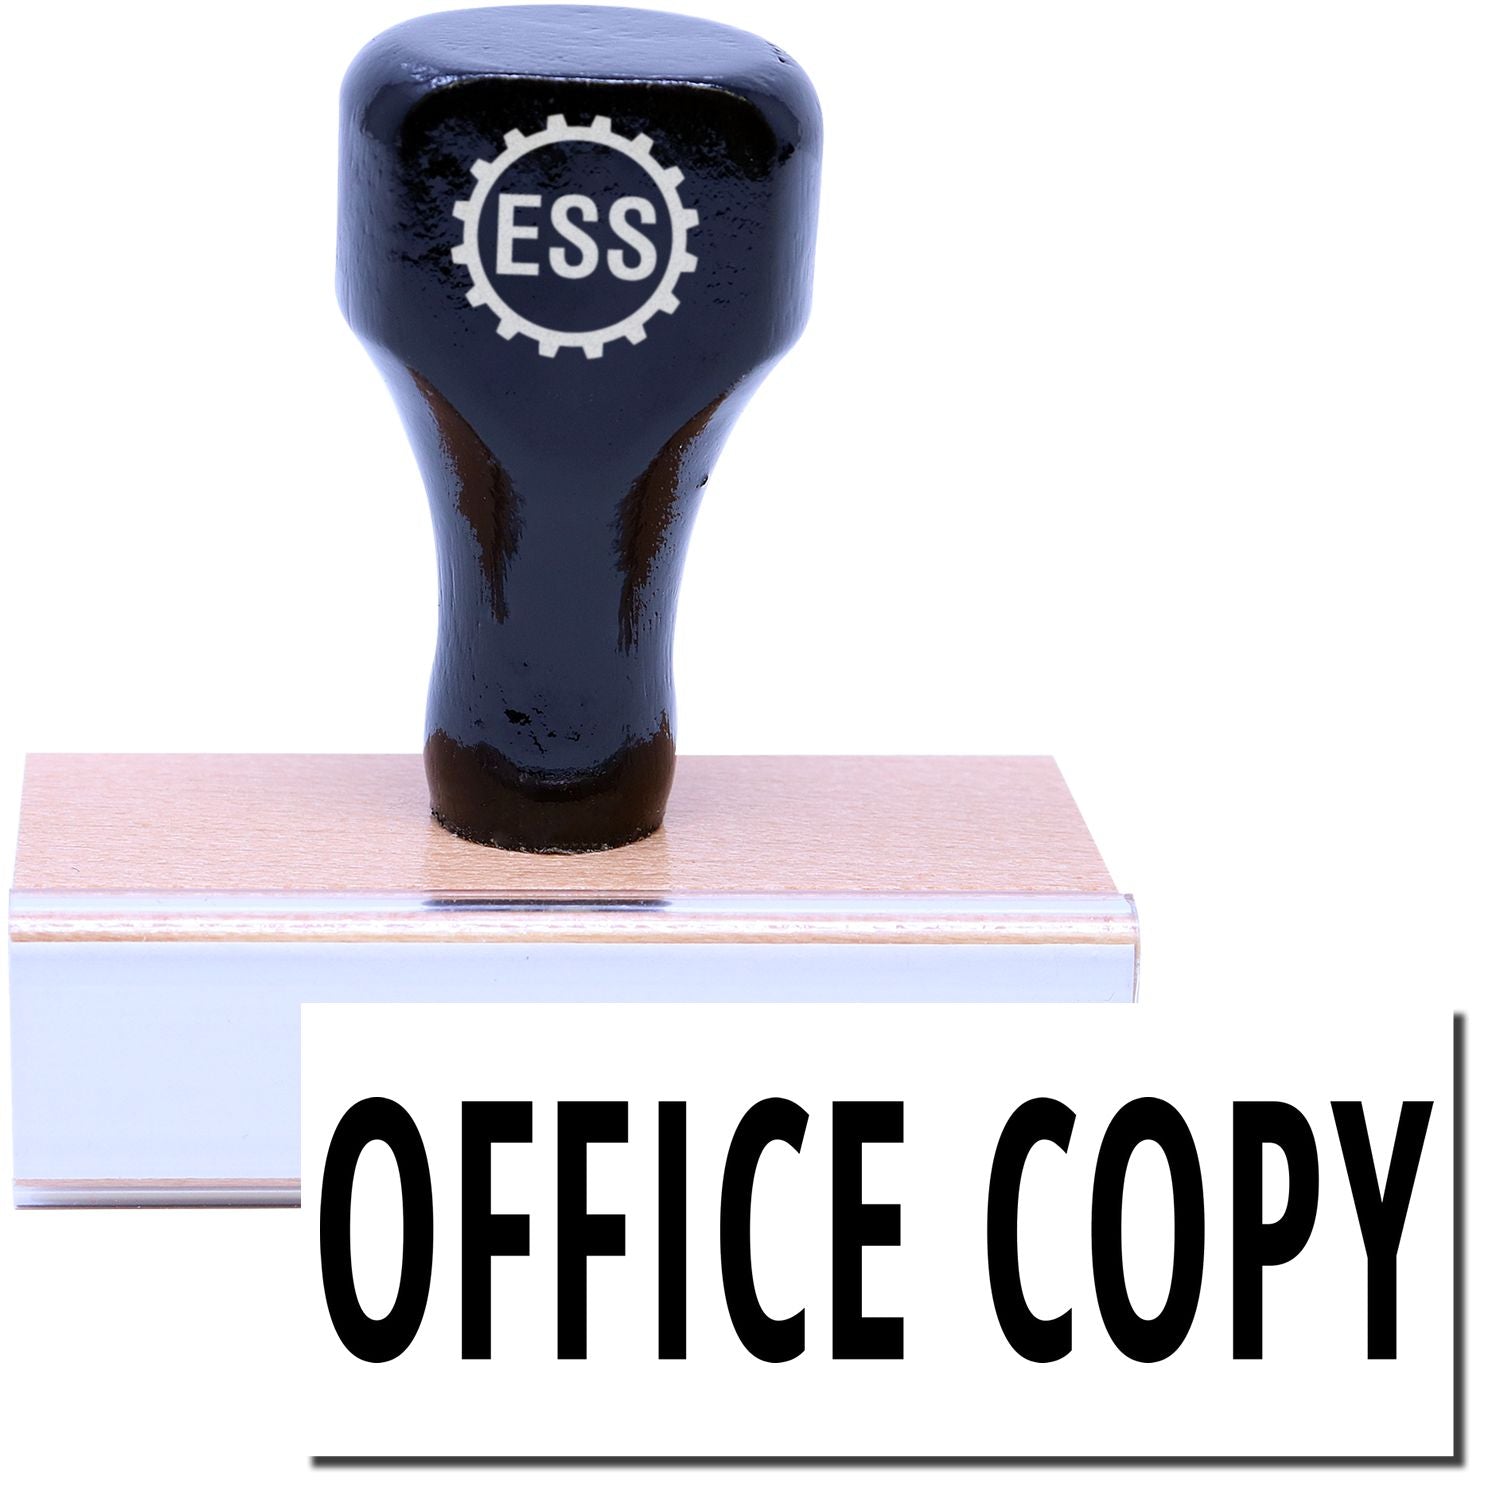 A stock office rubber stamp with a stamped image showing how the text "OFFICE COPY" in a large font is displayed after stamping.